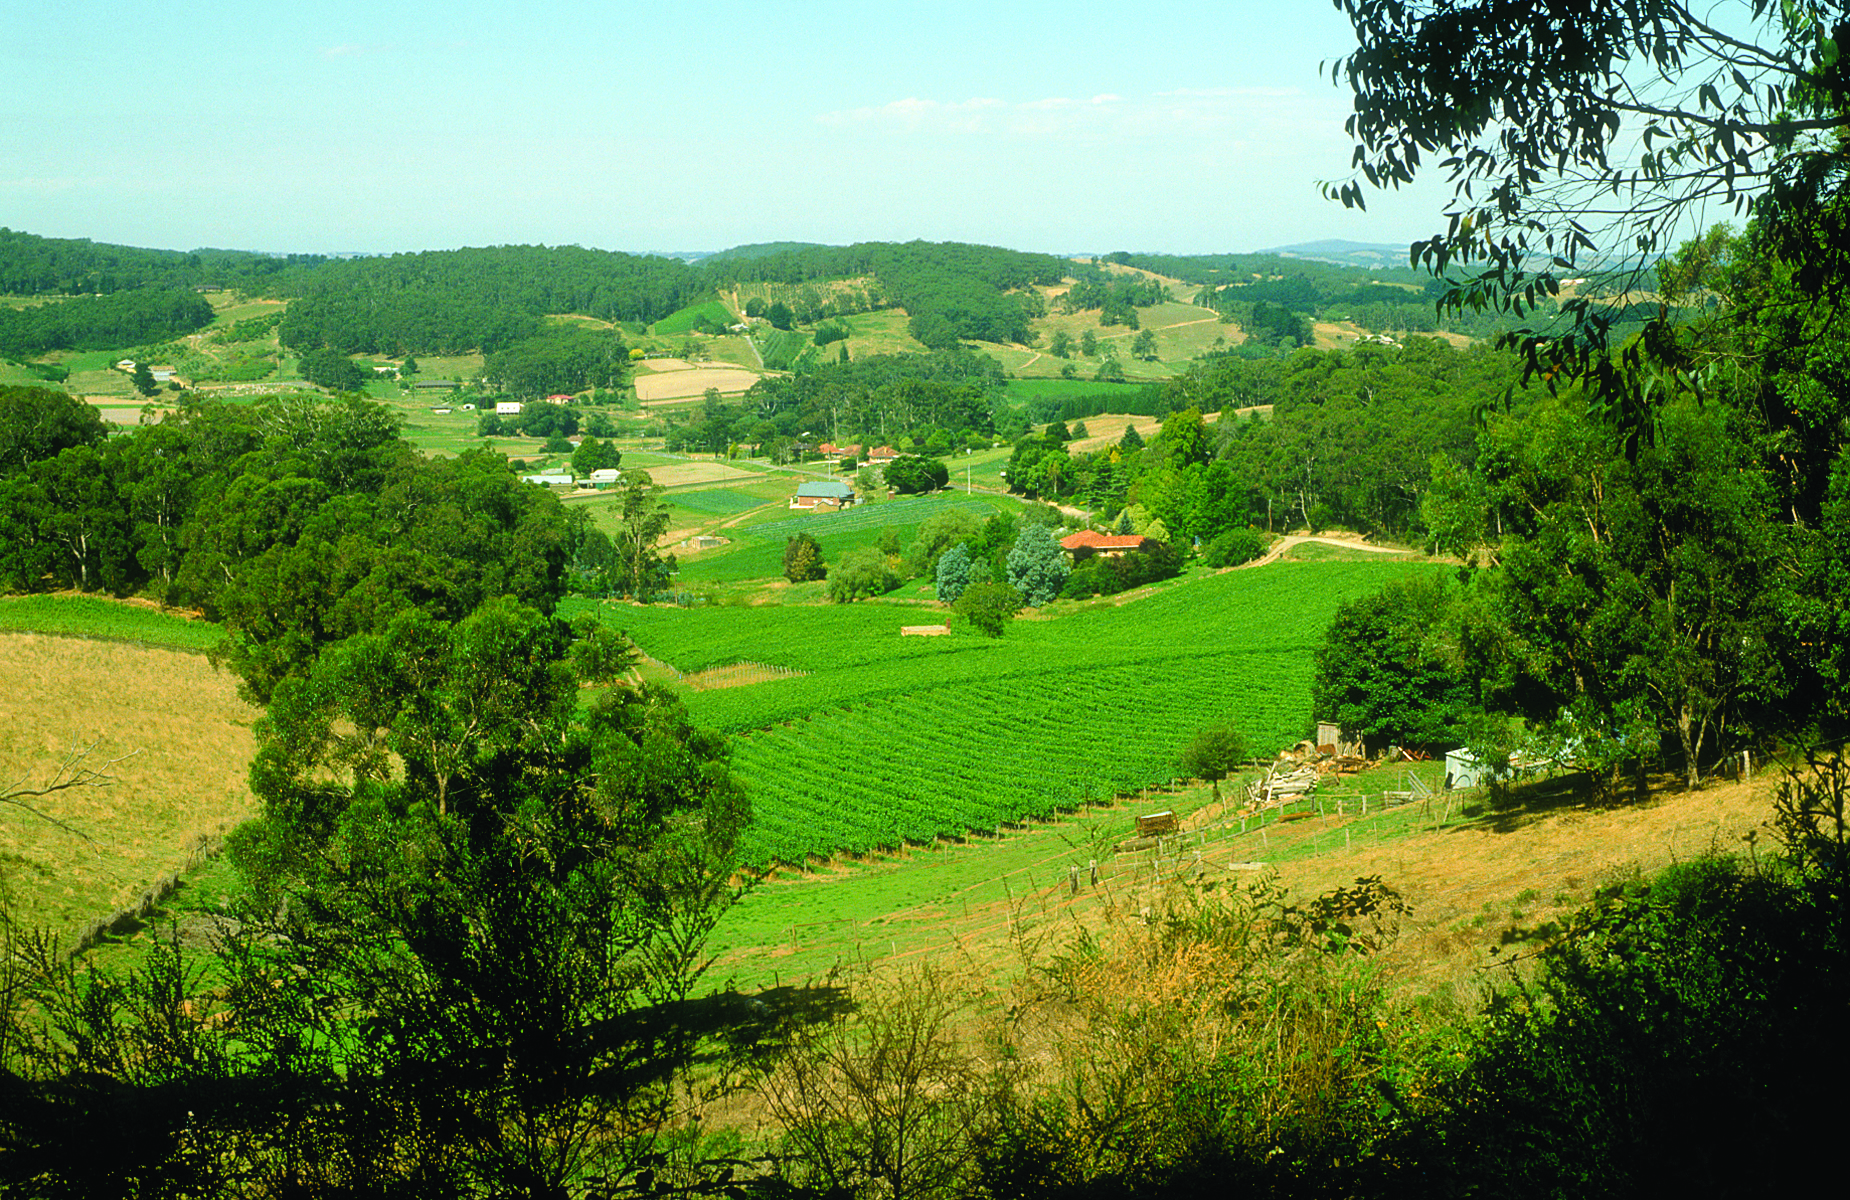 The (Adelaide) hills are alive with sound of wine growing. Photo credit: CSIRO